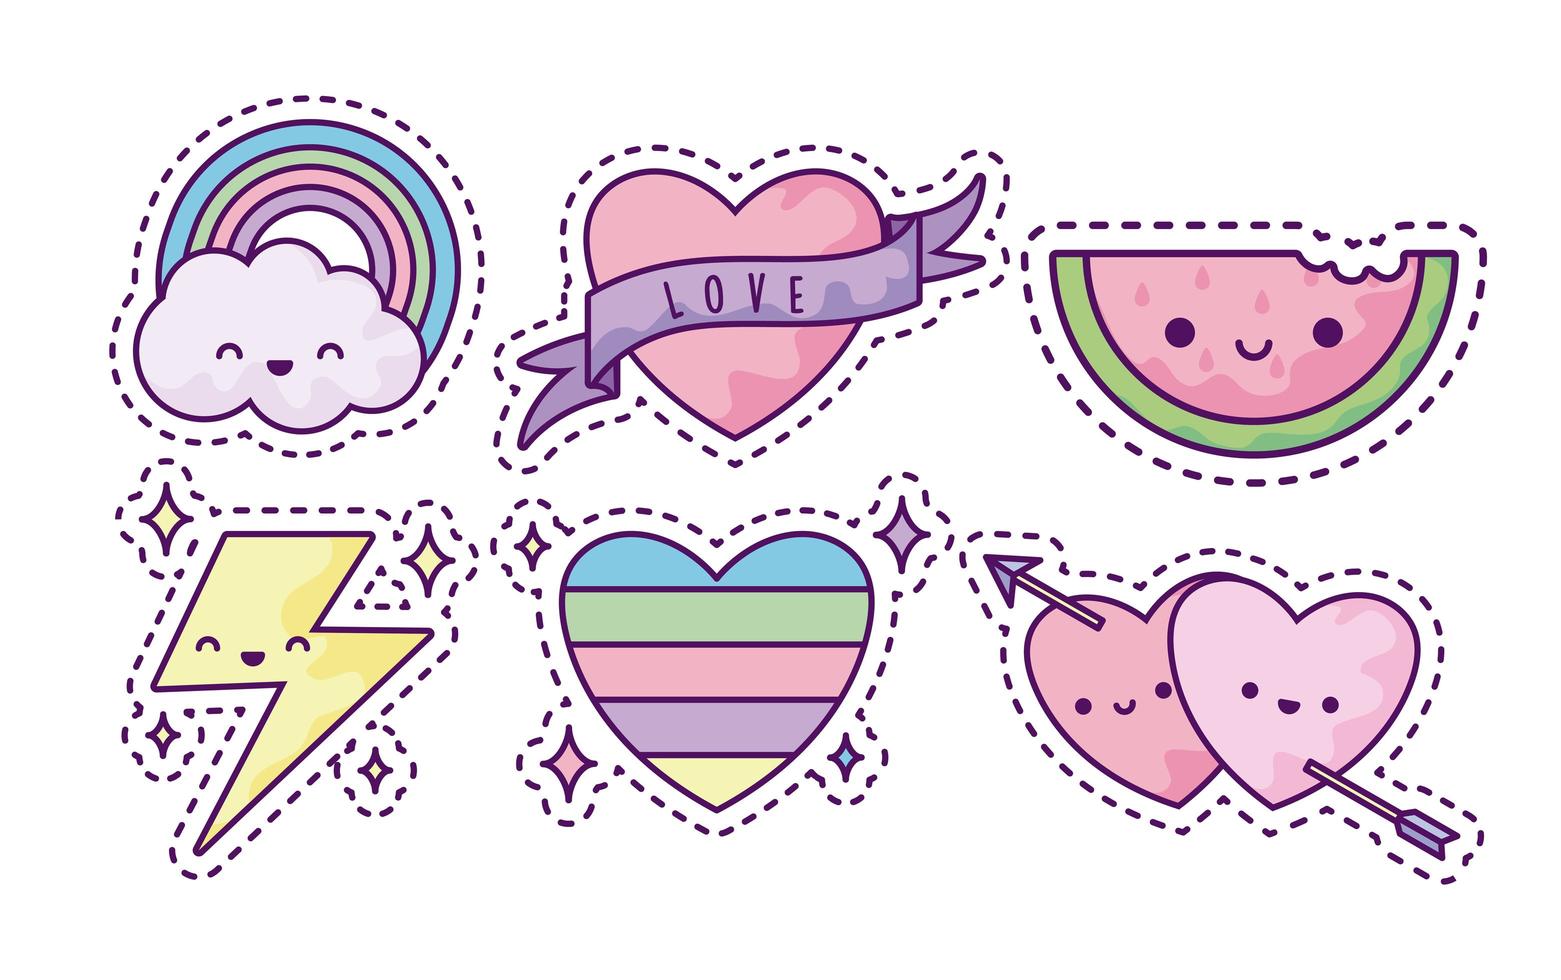 set of fashion patches, fun cartoon icons vector